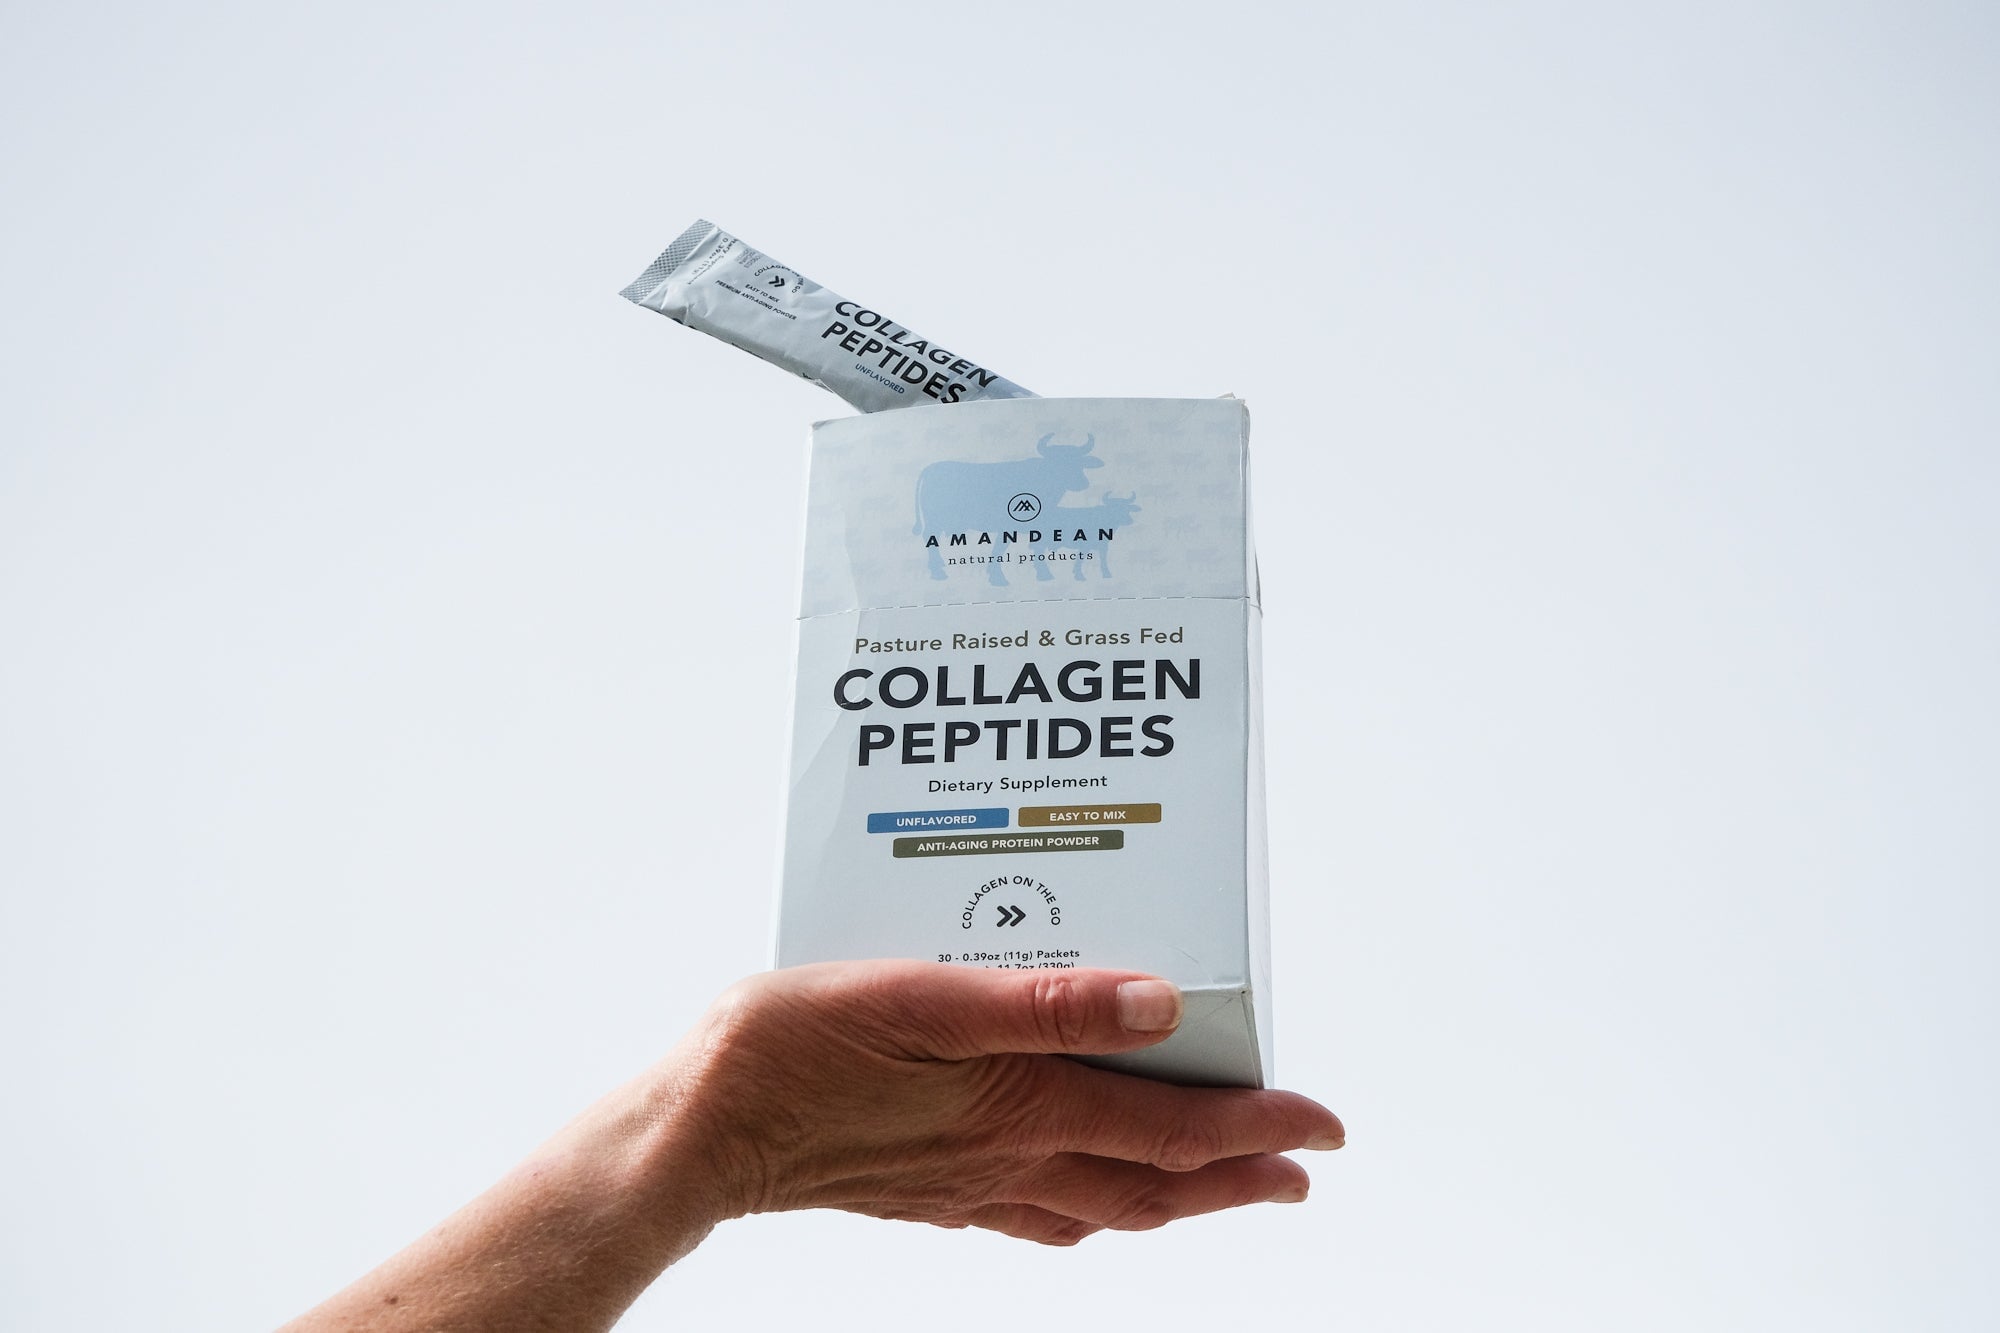 All About Collagen: The Amandean Complete Guide